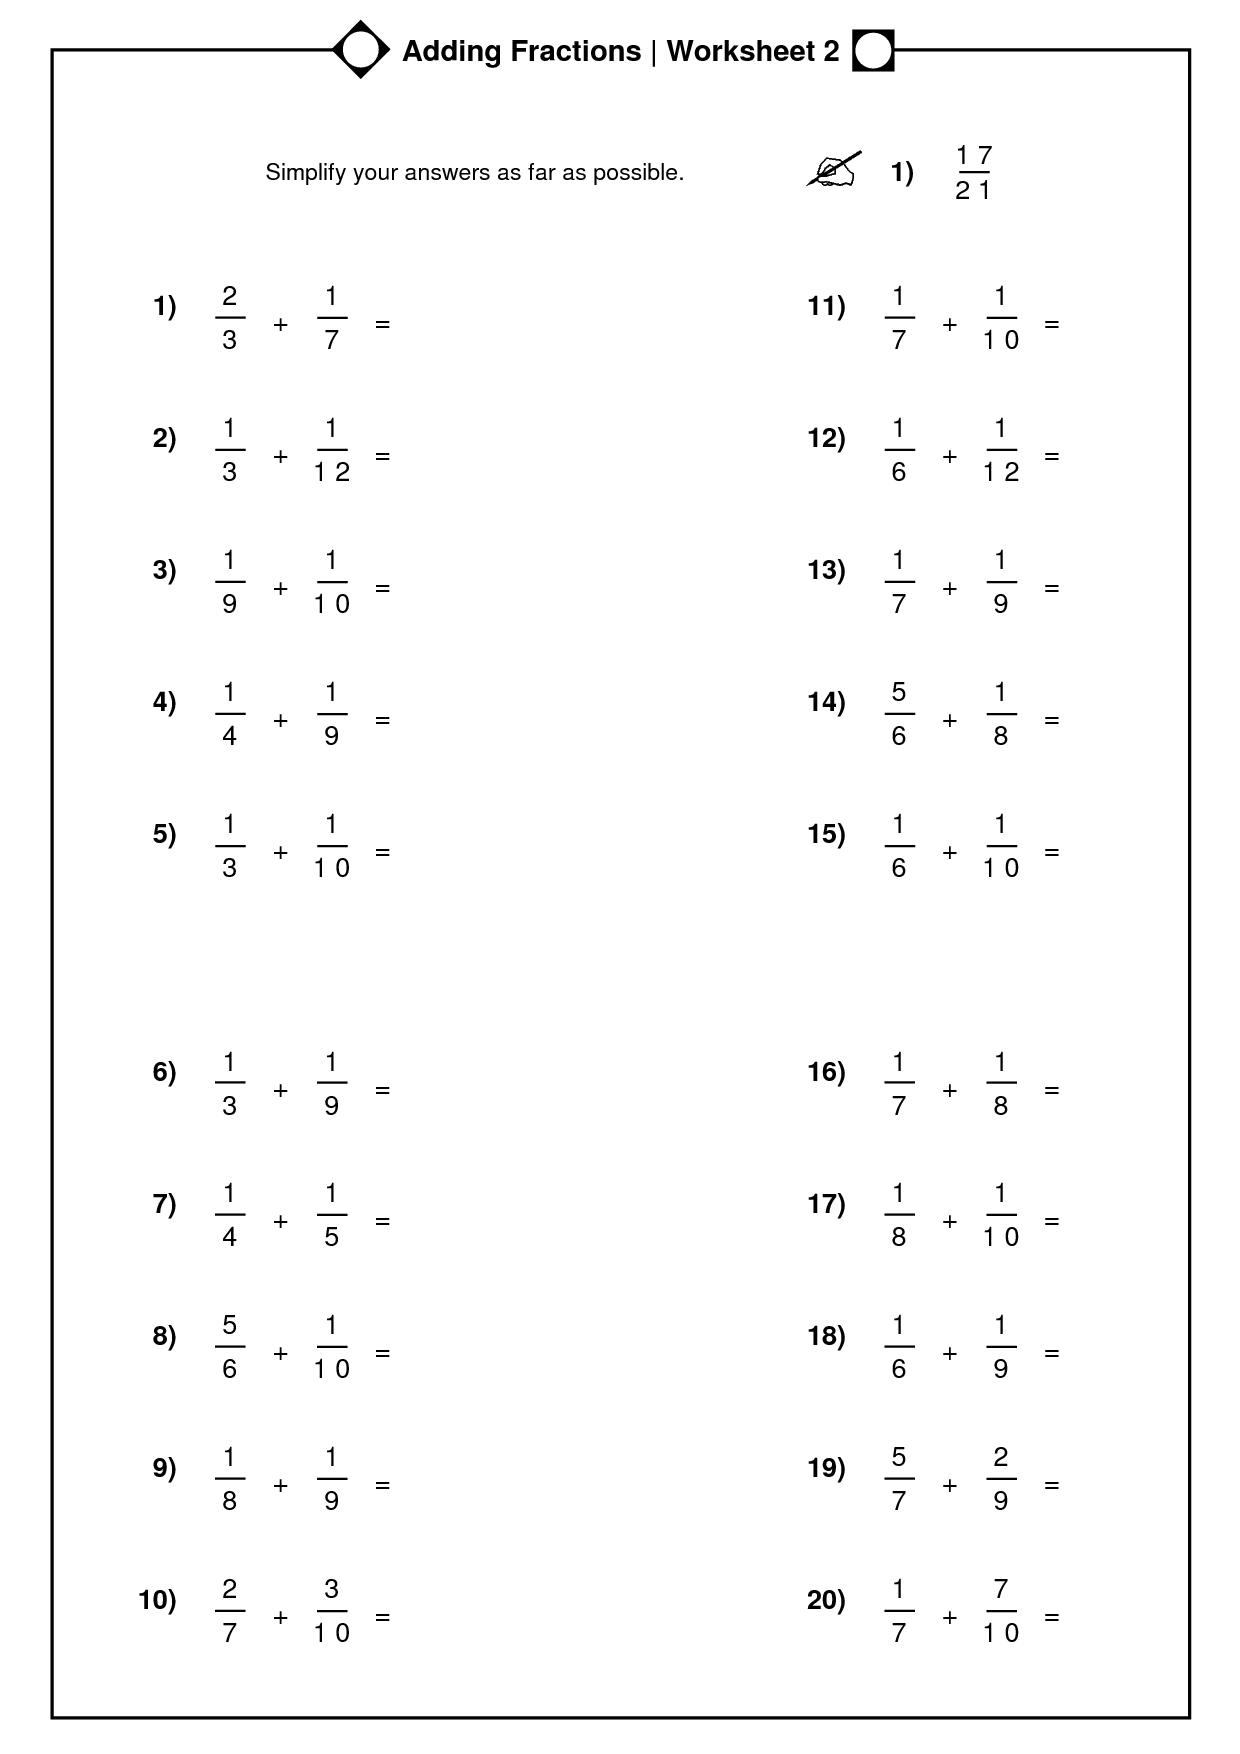 Homework Help Subtracting Fractions, Adding and Subtracting Regarding Reducing Fractions Worksheet Pdf